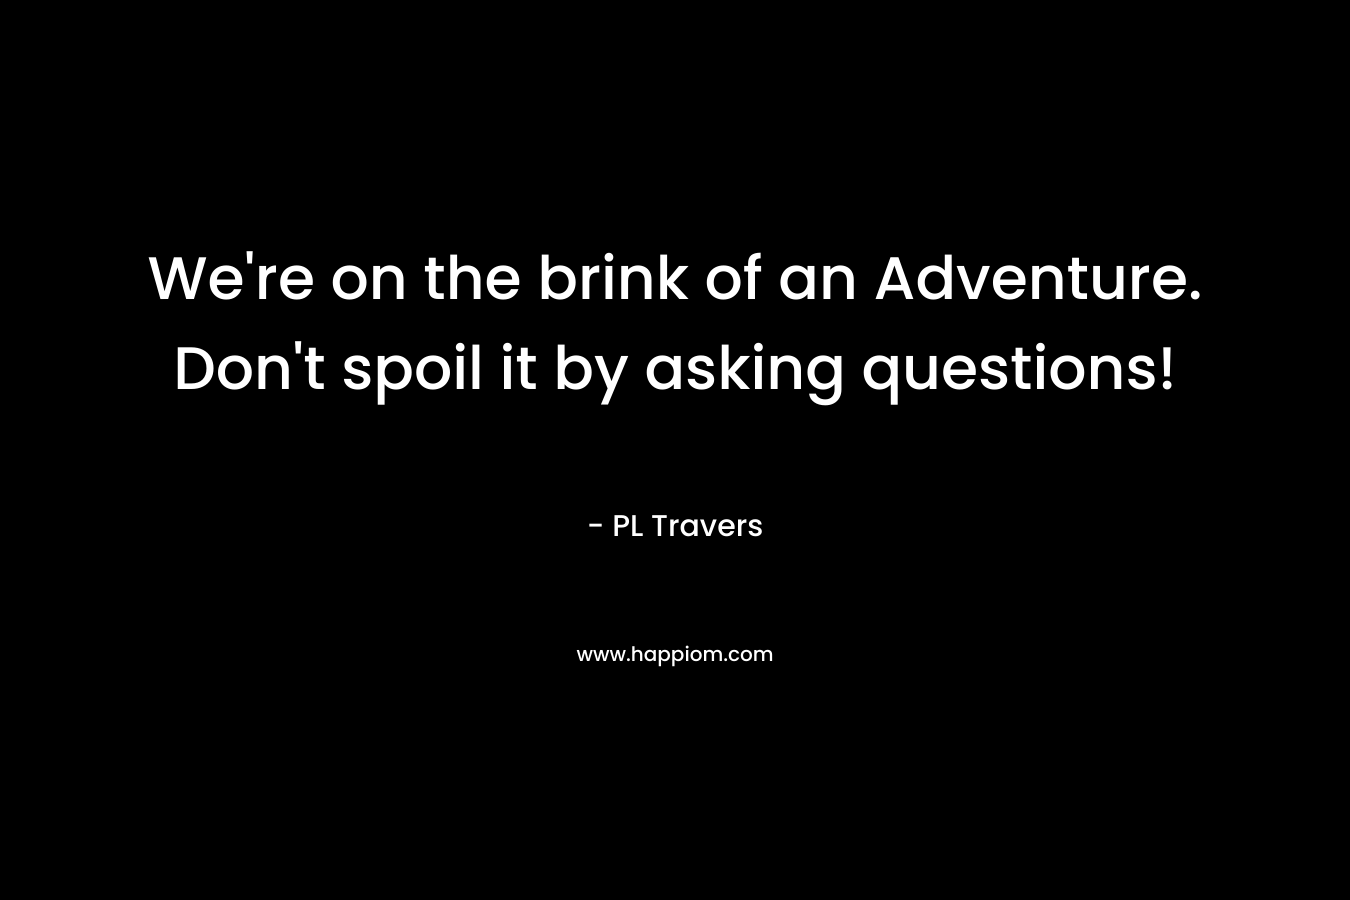 We're on the brink of an Adventure. Don't spoil it by asking questions!